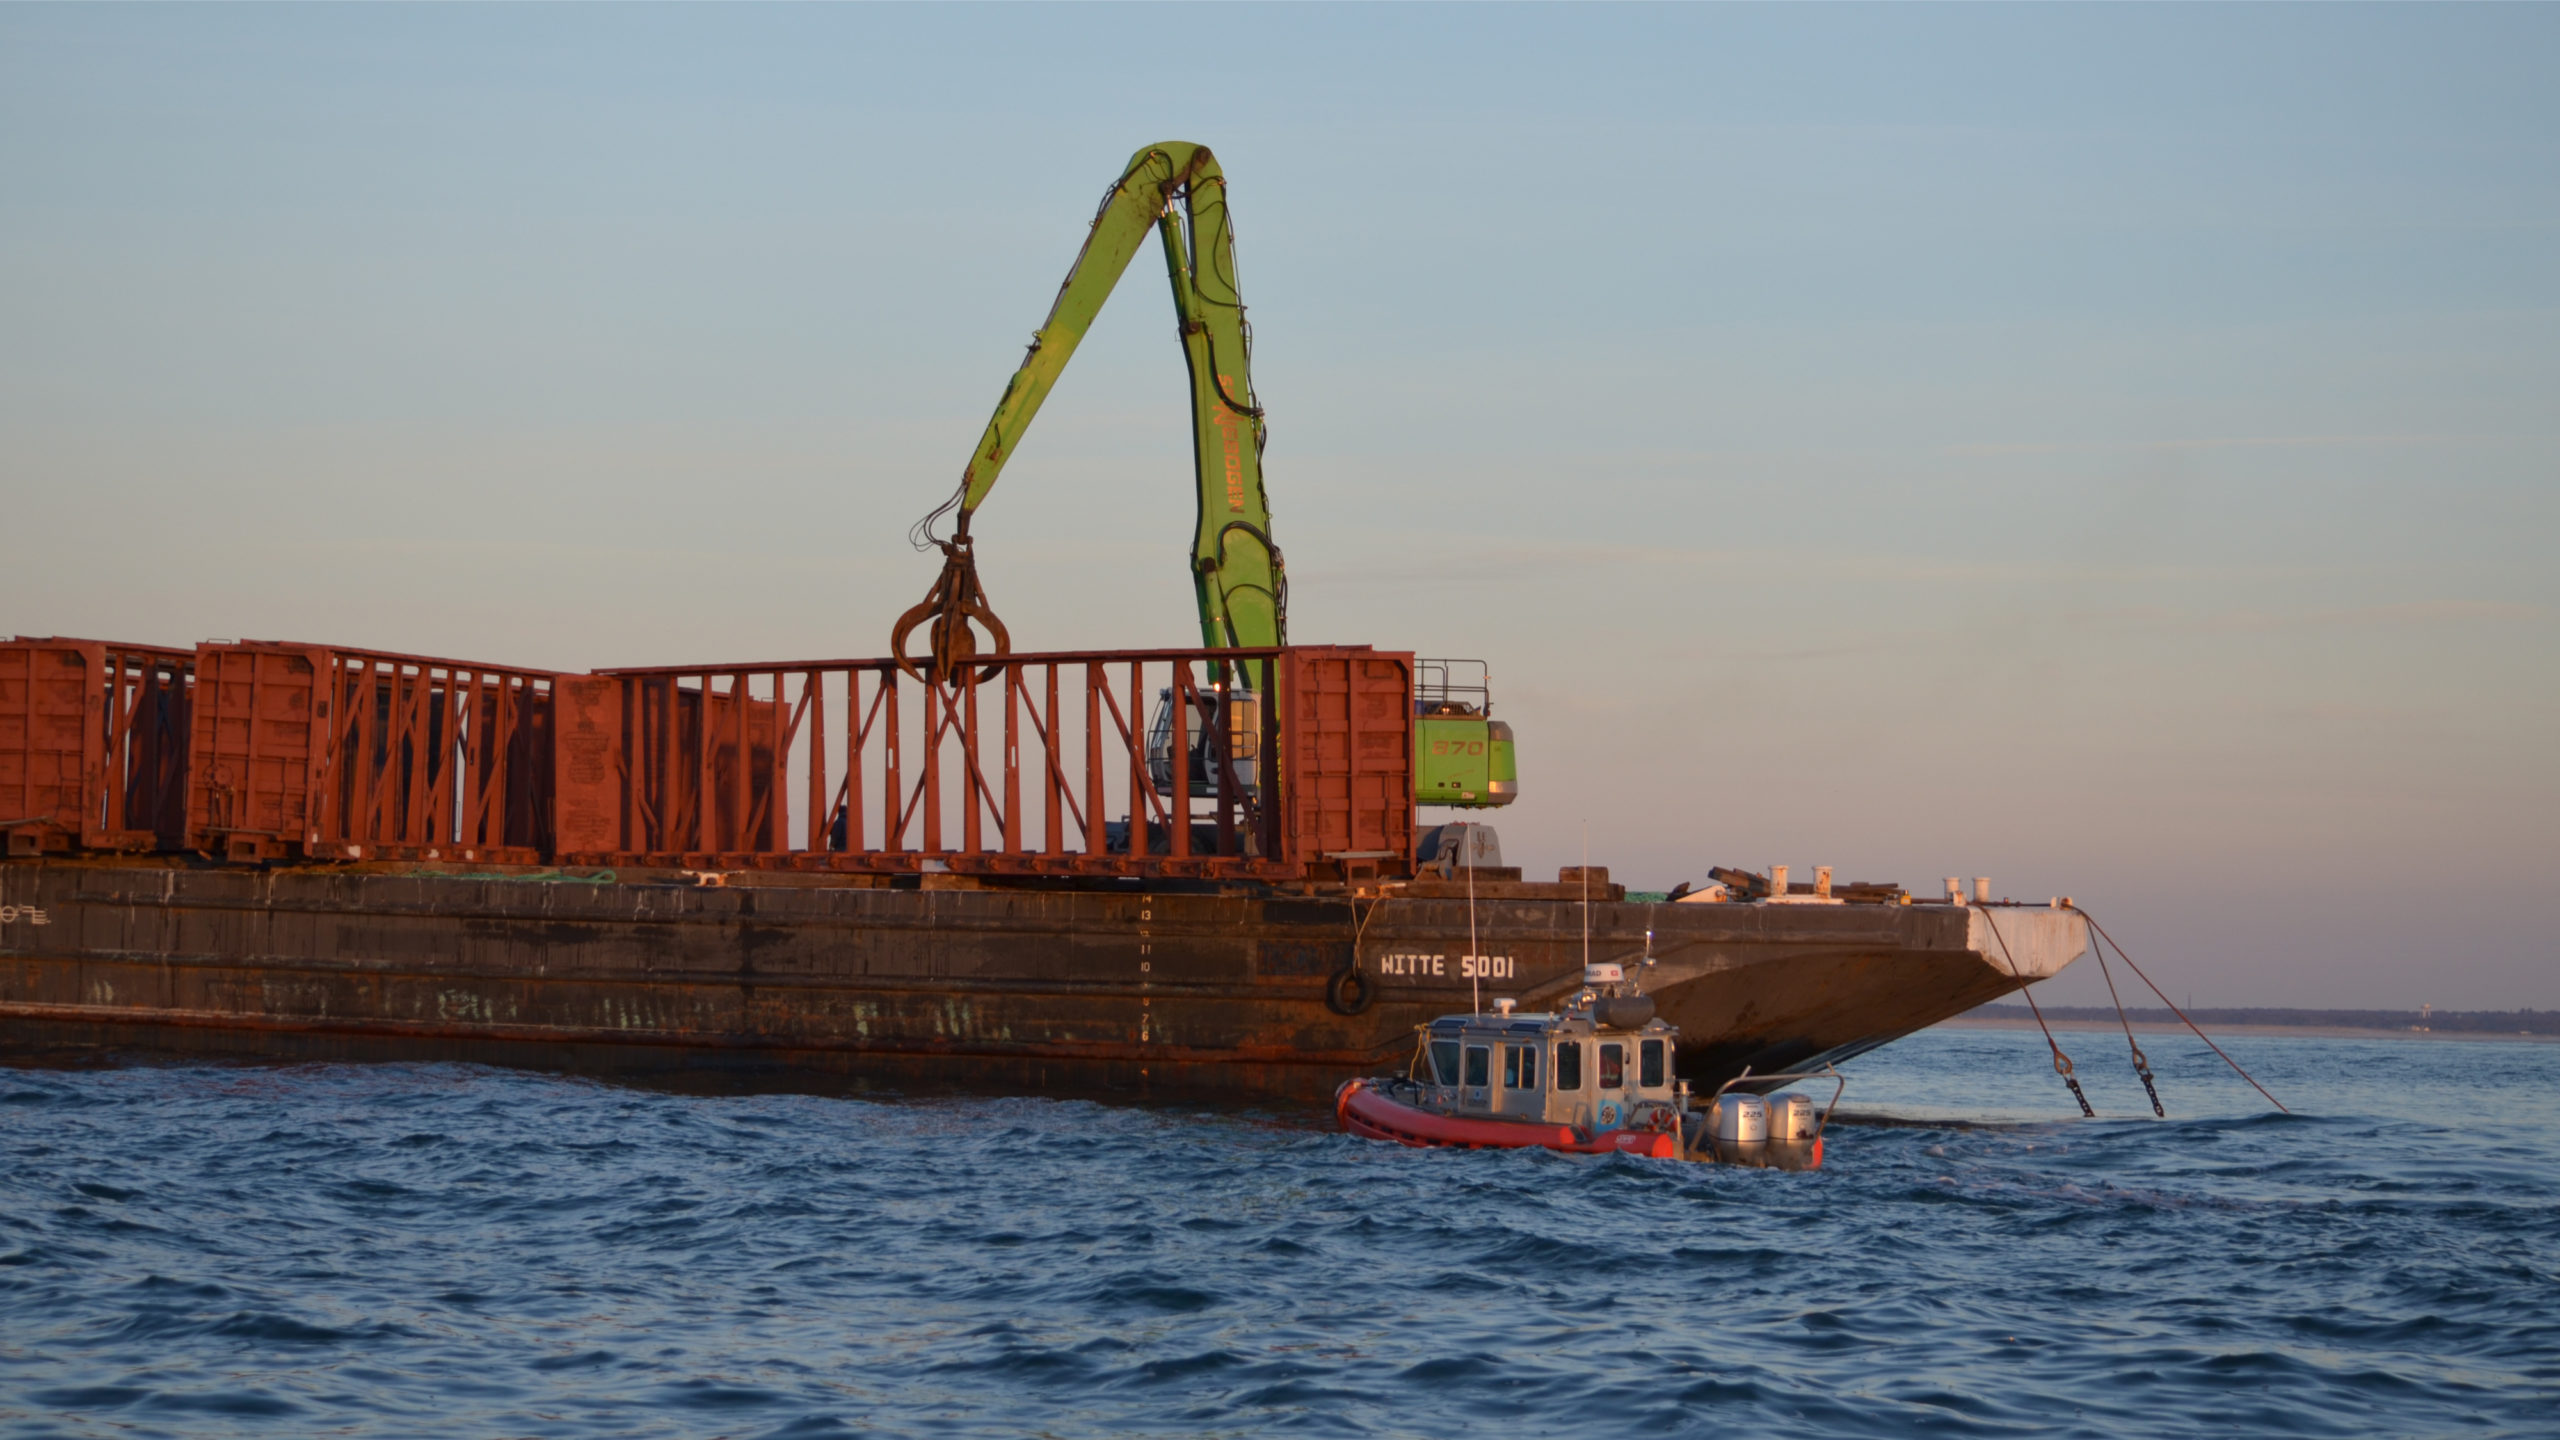 Eleven Wells Fargo rail cars were recently added to the Shinnecock and Moriches artificial reefs.